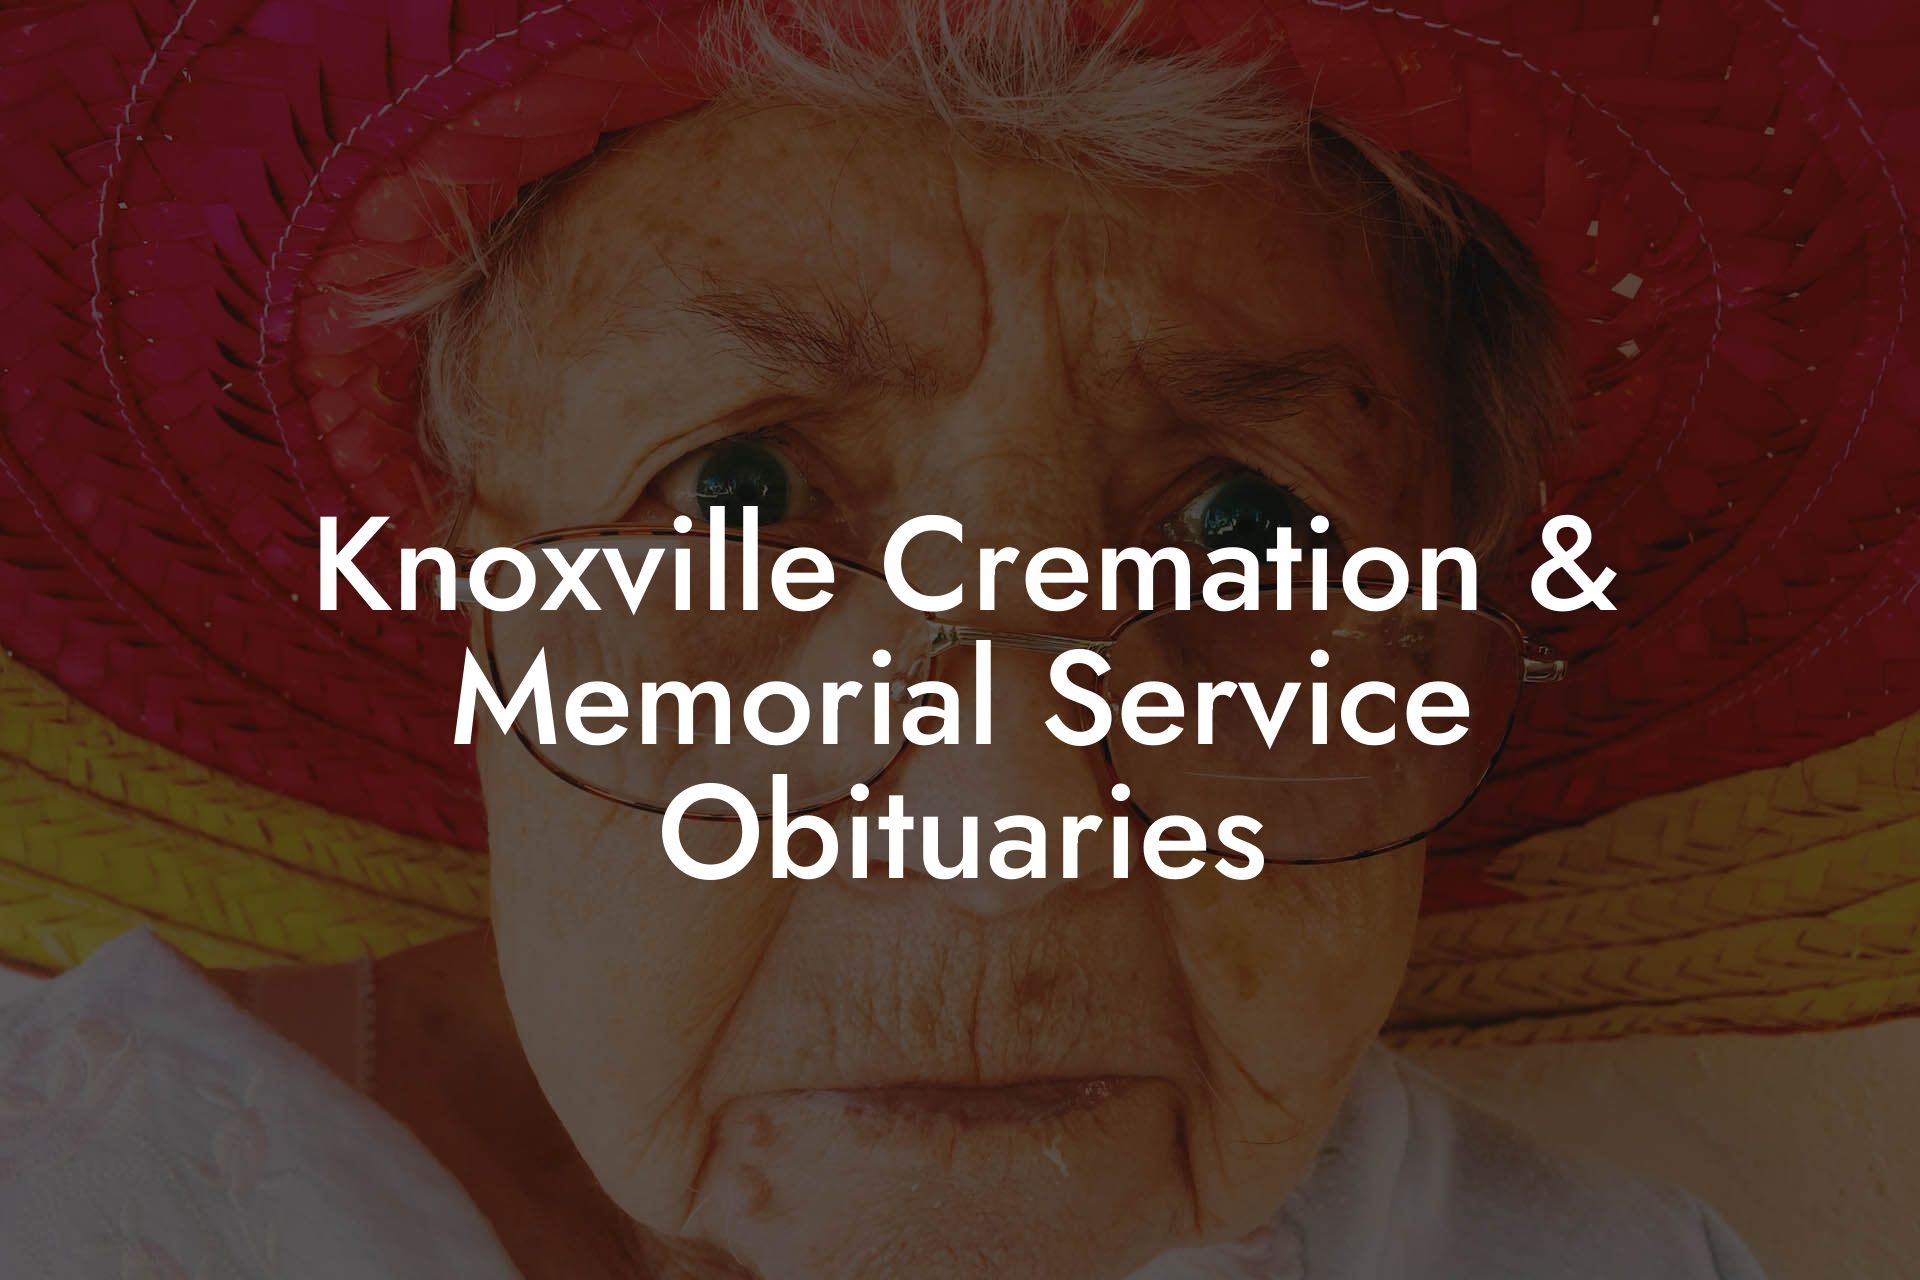 Knoxville Cremation & Memorial Service Obituaries